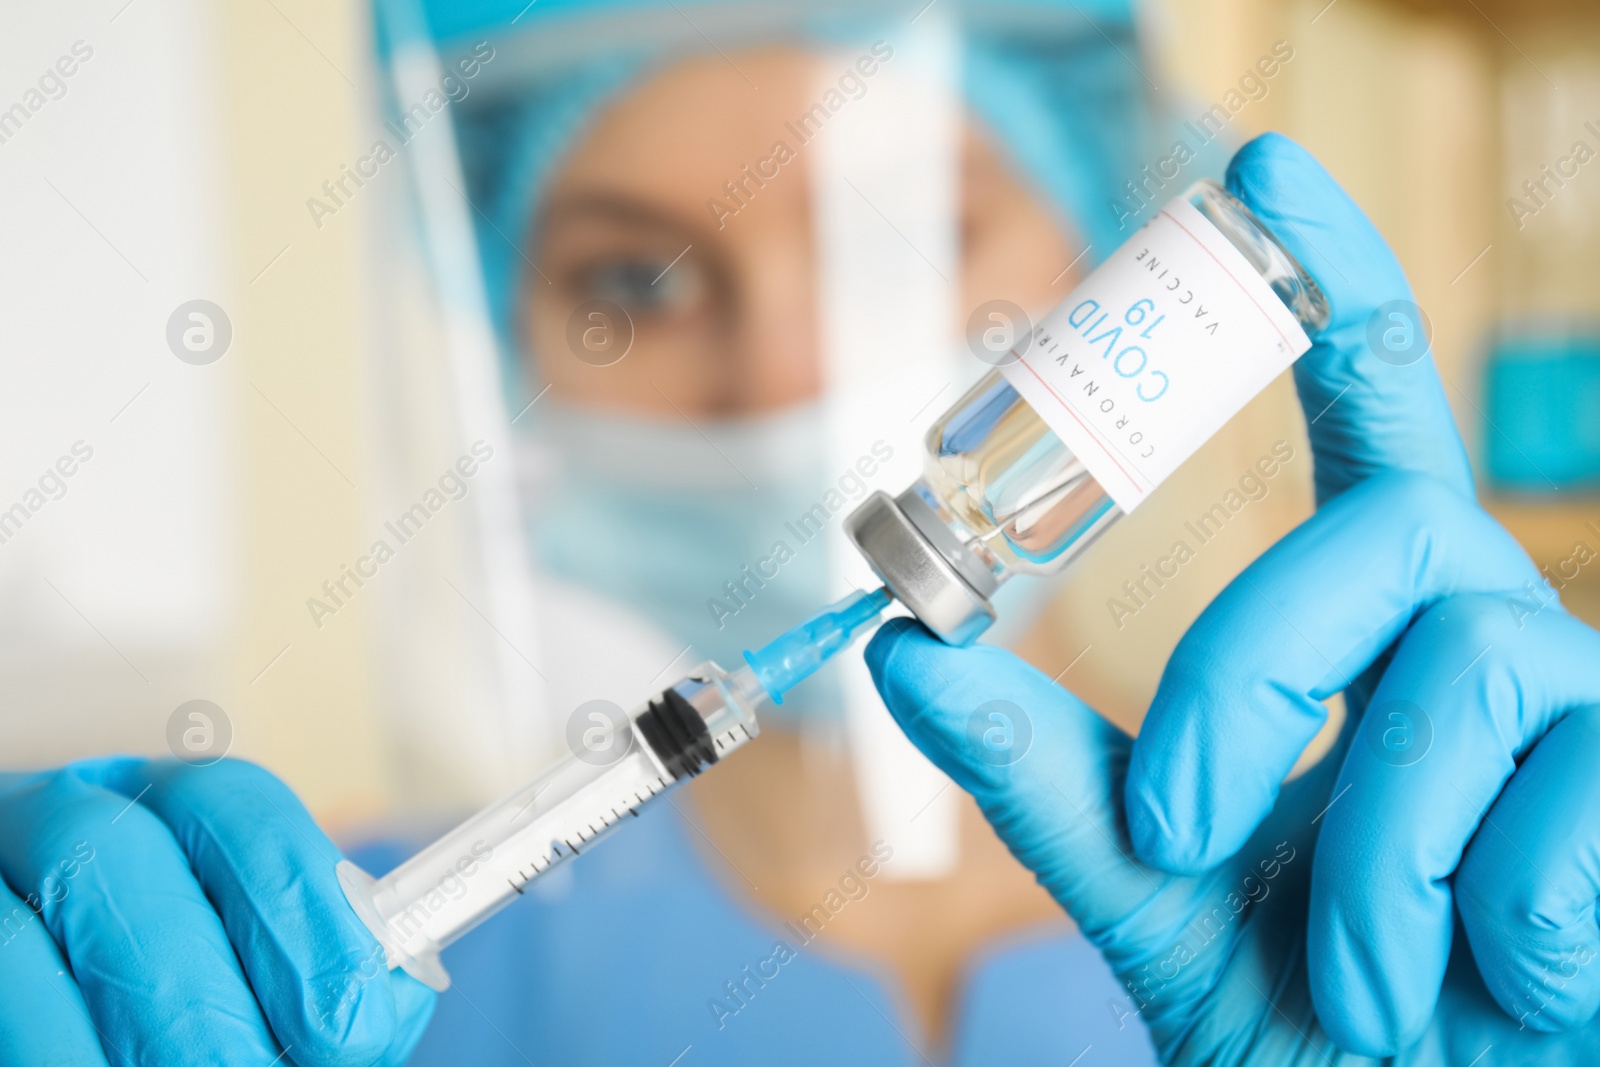 Photo of Doctor filling syringe with vaccine against Covid-19 in hospital, focus on hands